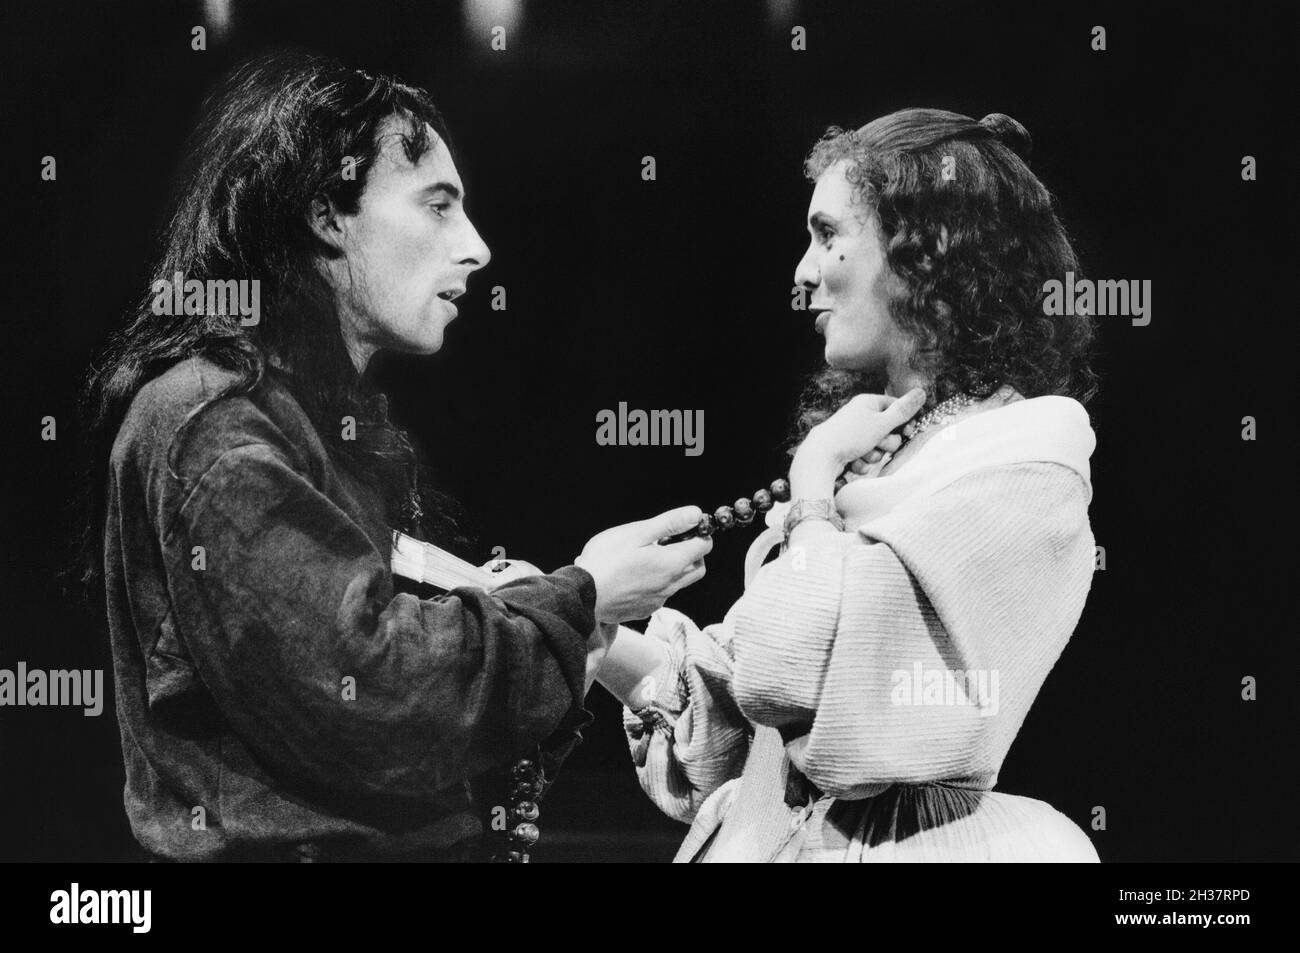 Antony Sher (Tartuffe), Alison Steadman (Elmire) in TARTUFFE  by Moliere at the Royal Shakespeare Company (RSC), The Pit, Barbican Theatre, London EC2   28/07/1983  translated by Christopher Hampton  design: Alison Chitty  lighting: Leo Leibovici  director: Bill Alexander Stock Photo